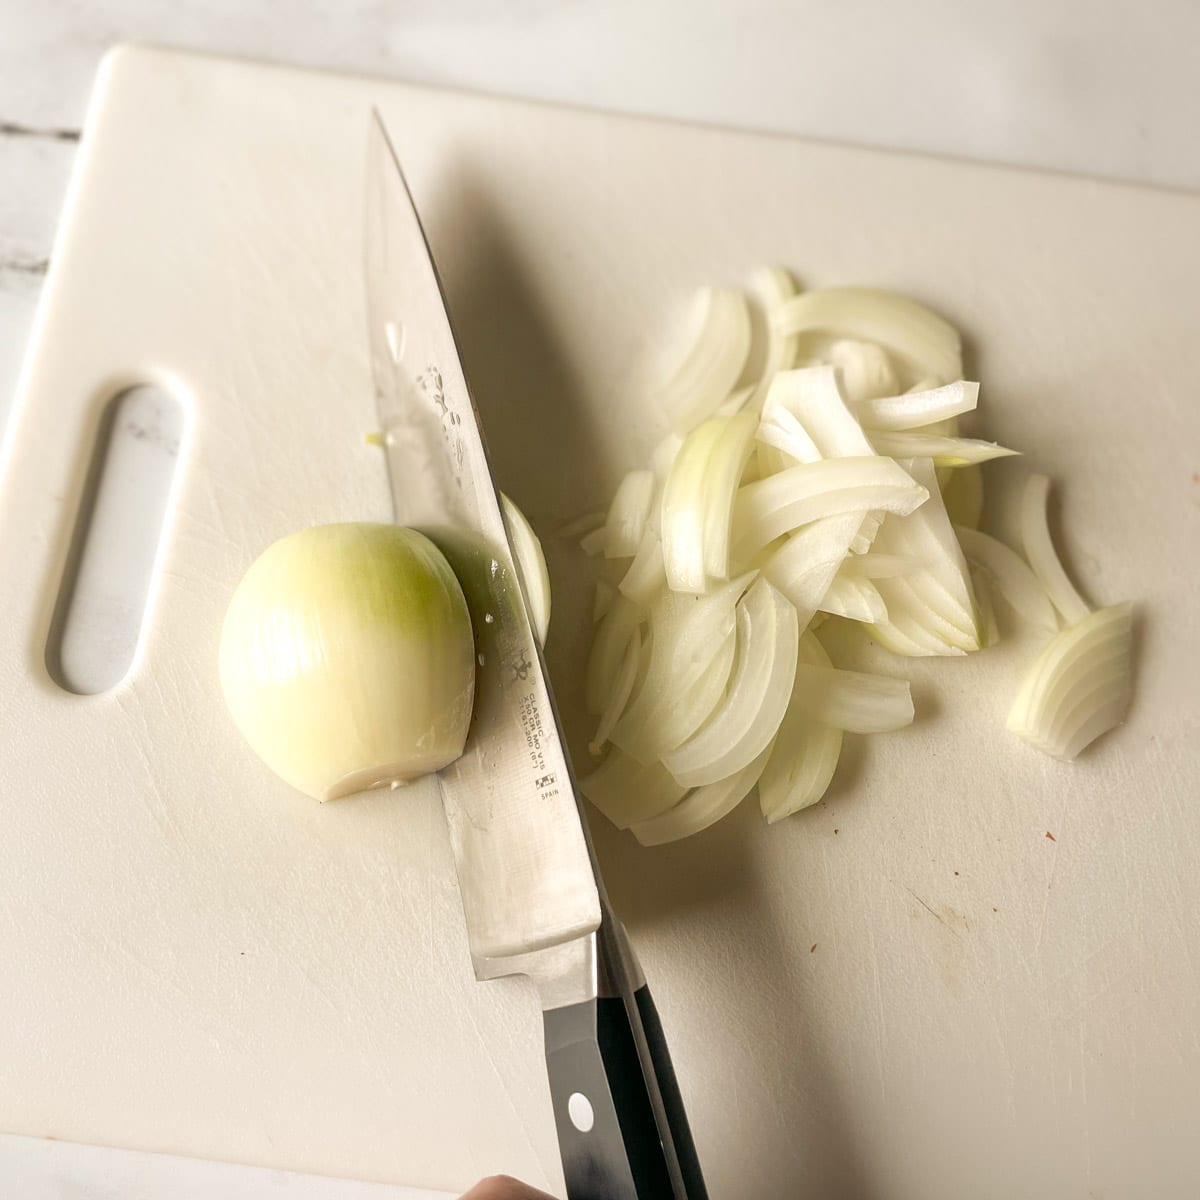 A halved onion is sliced at a diagonal angle to create even, thin slices.